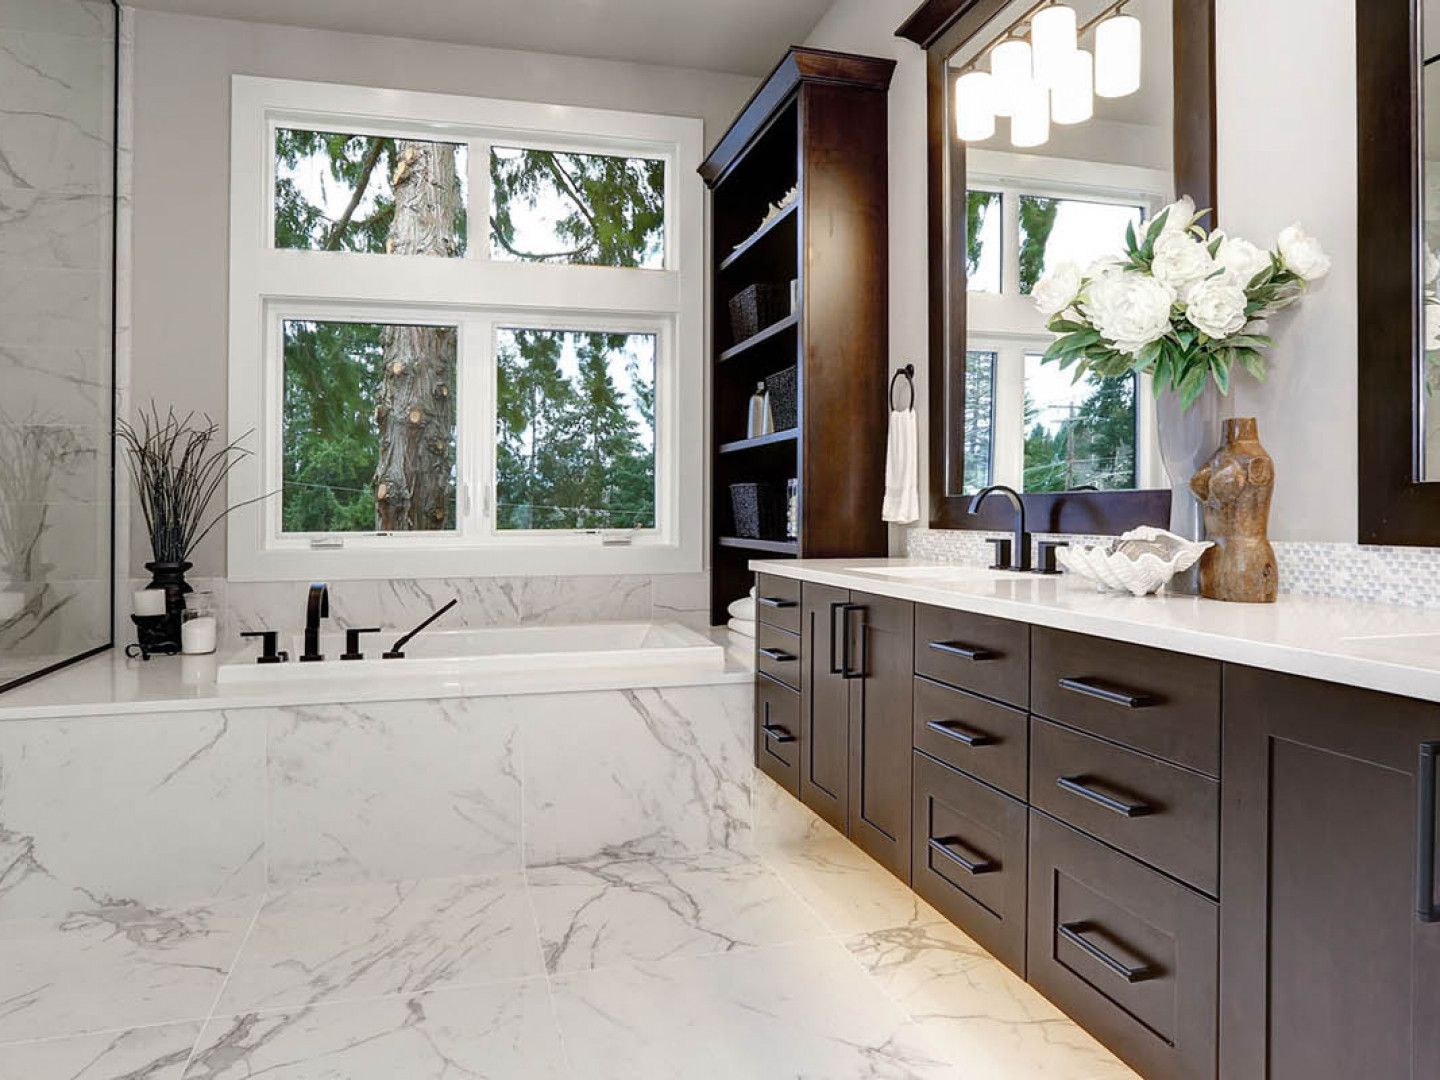 Beautiful modern bathroom with marble walls, granite countertops, gorgeous soft white lighting, brand new fixtures, and dark wood drawers, shelves, and cabinets. 